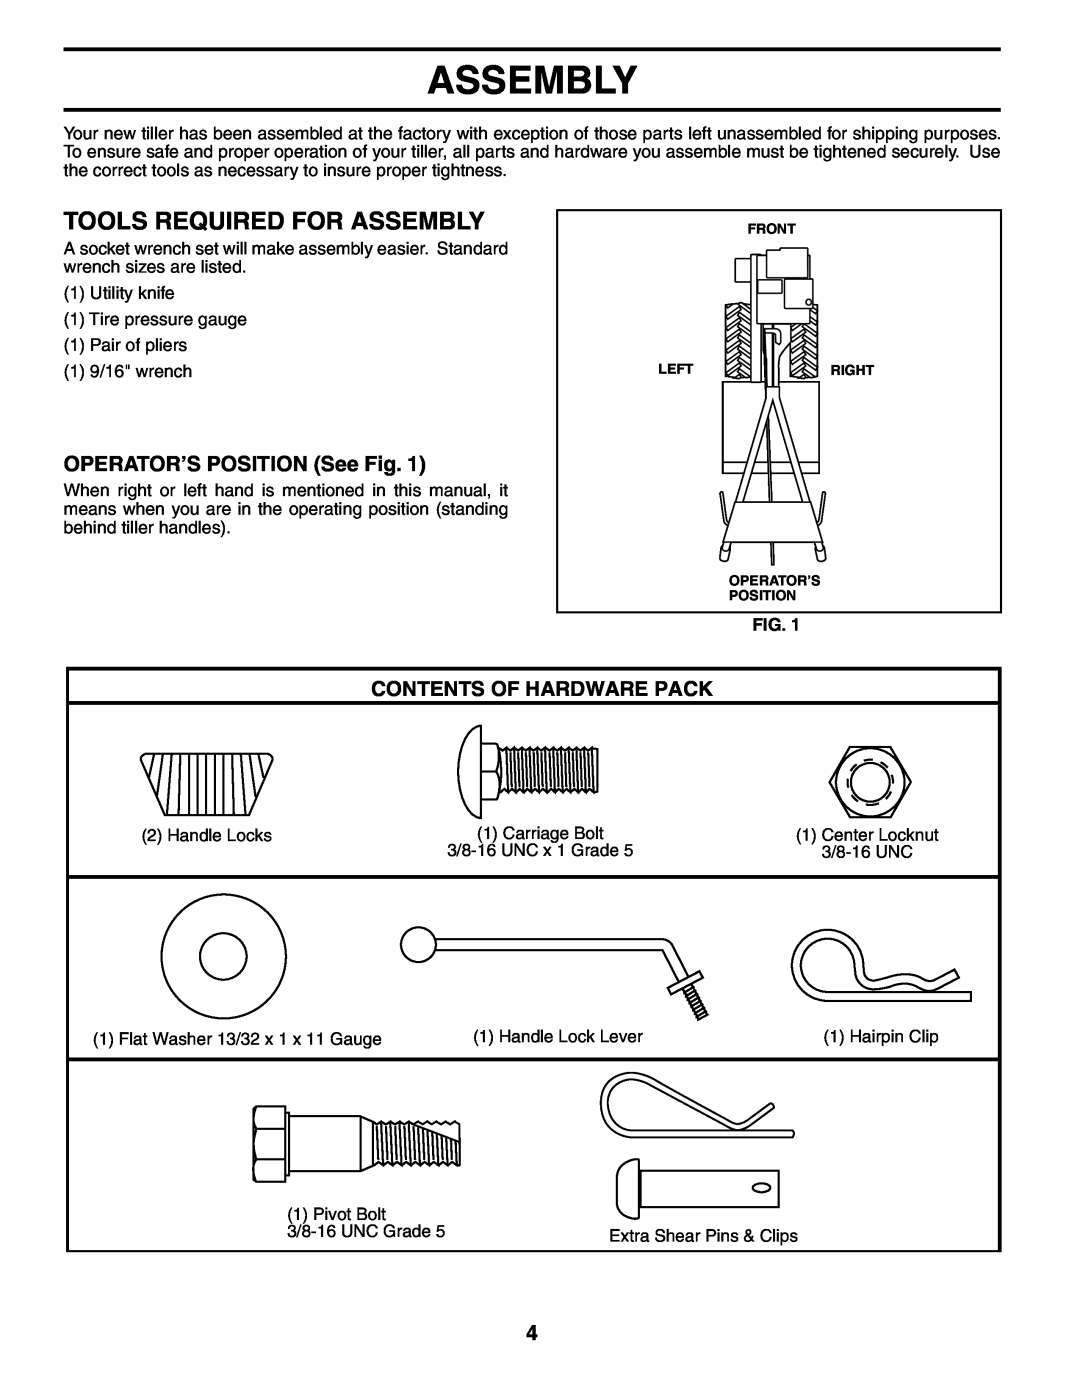 Weed Eater 186100 owner manual Tools Required For Assembly, OPERATOR’S POSITION See Fig, Contents Of Hardware Pack 